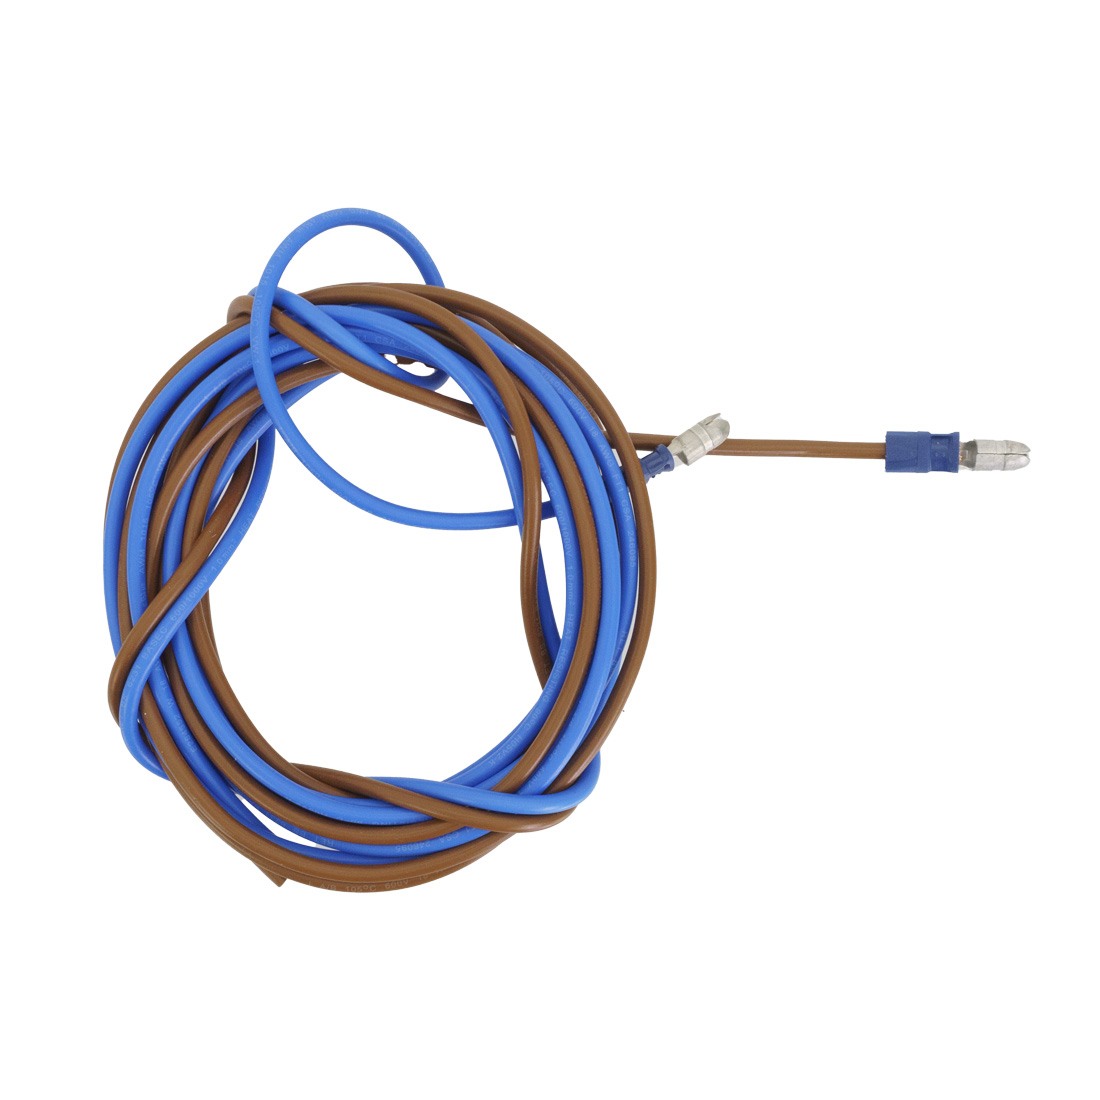 Spring Europe Battery Powered Pump Controller V16 - Charging Brown Blue Cord View